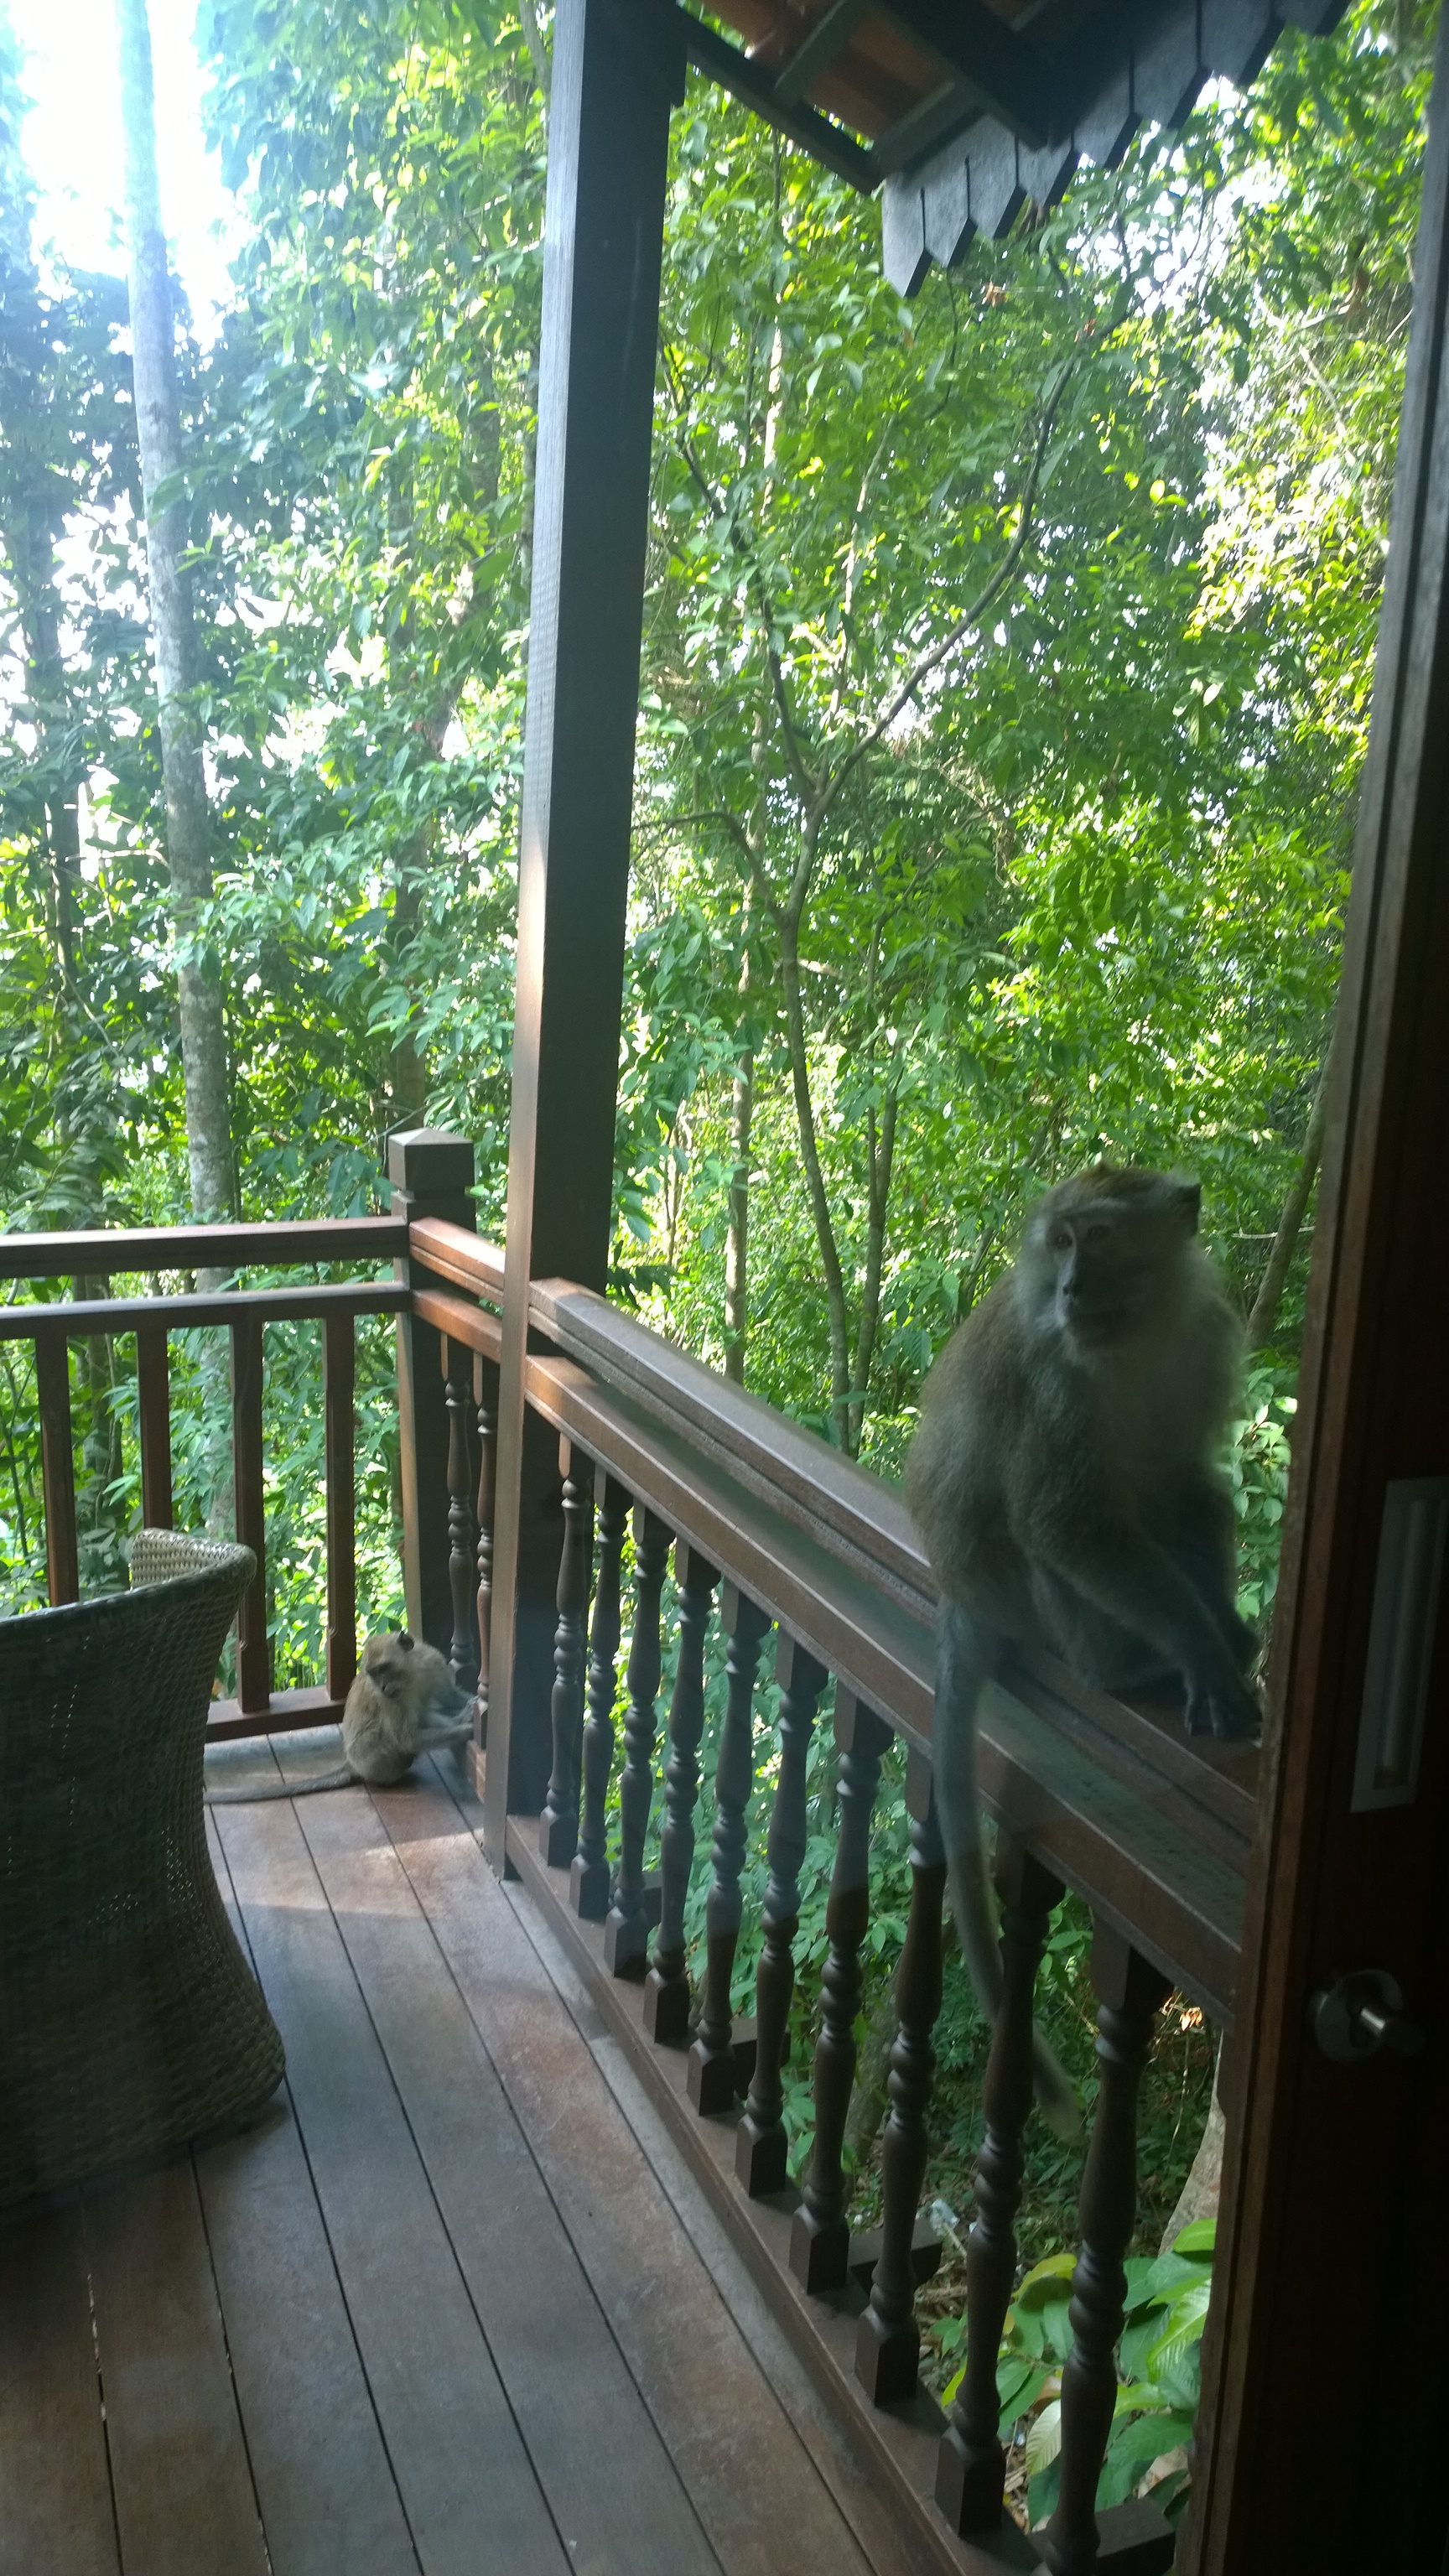 Macaque hanging out on my balcony